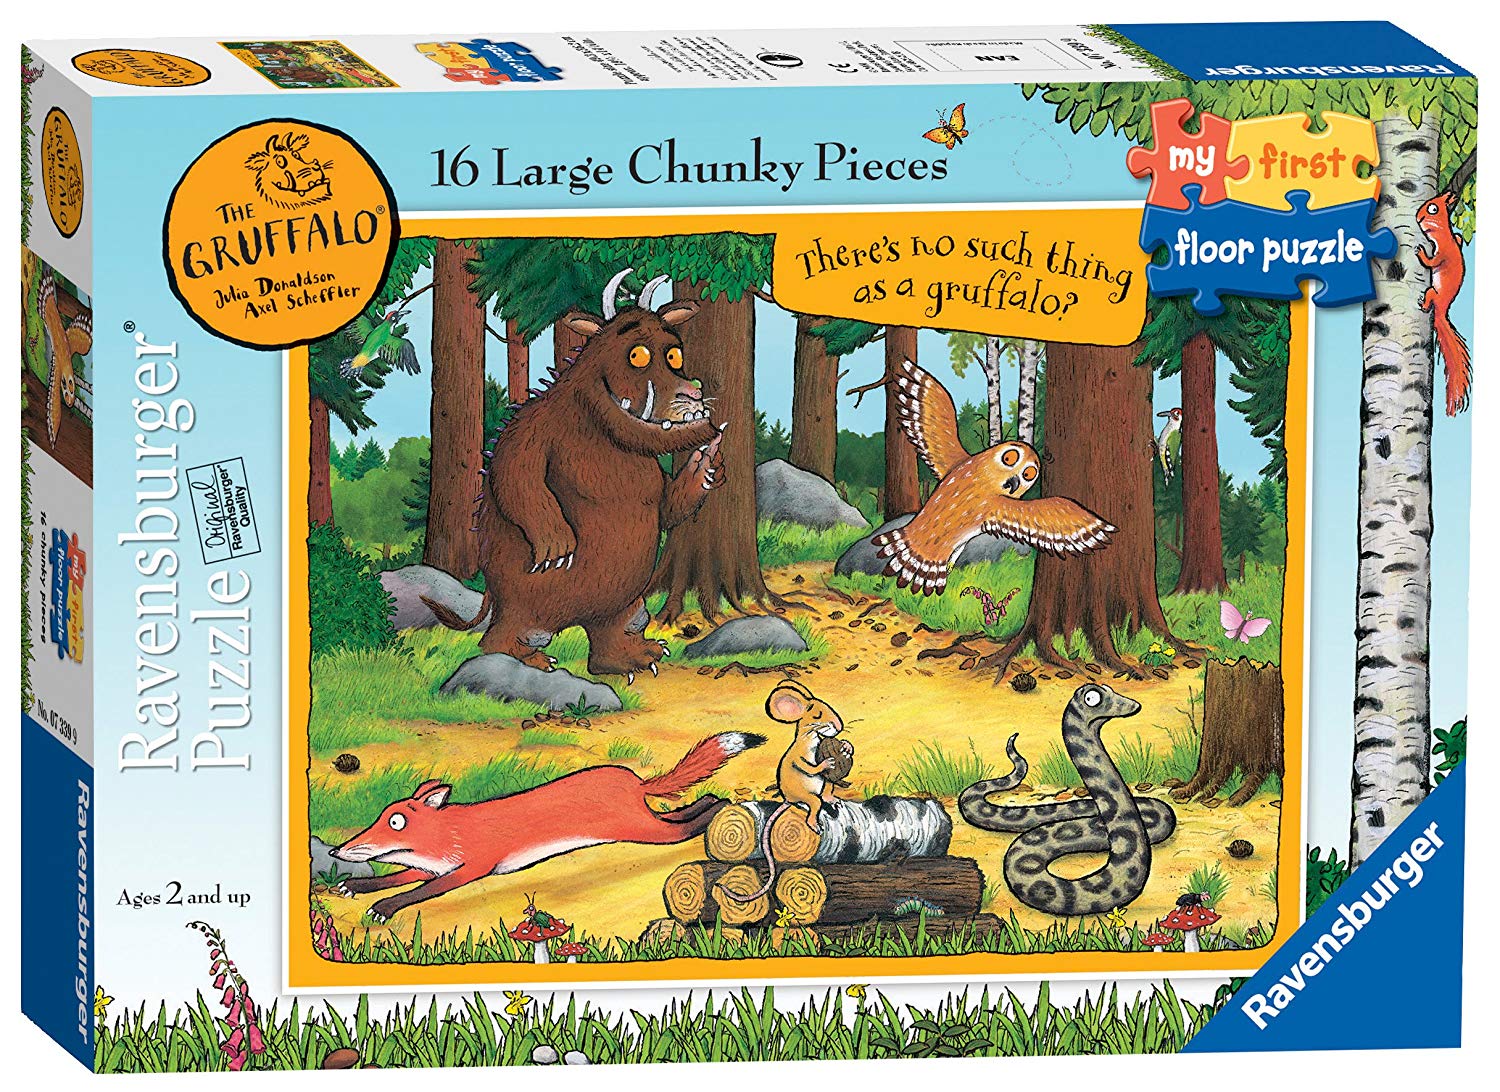 My First Floor Puzzle The Gruffalo 16 Piece Jigsaw Puzzles For Toddlers Age 24 